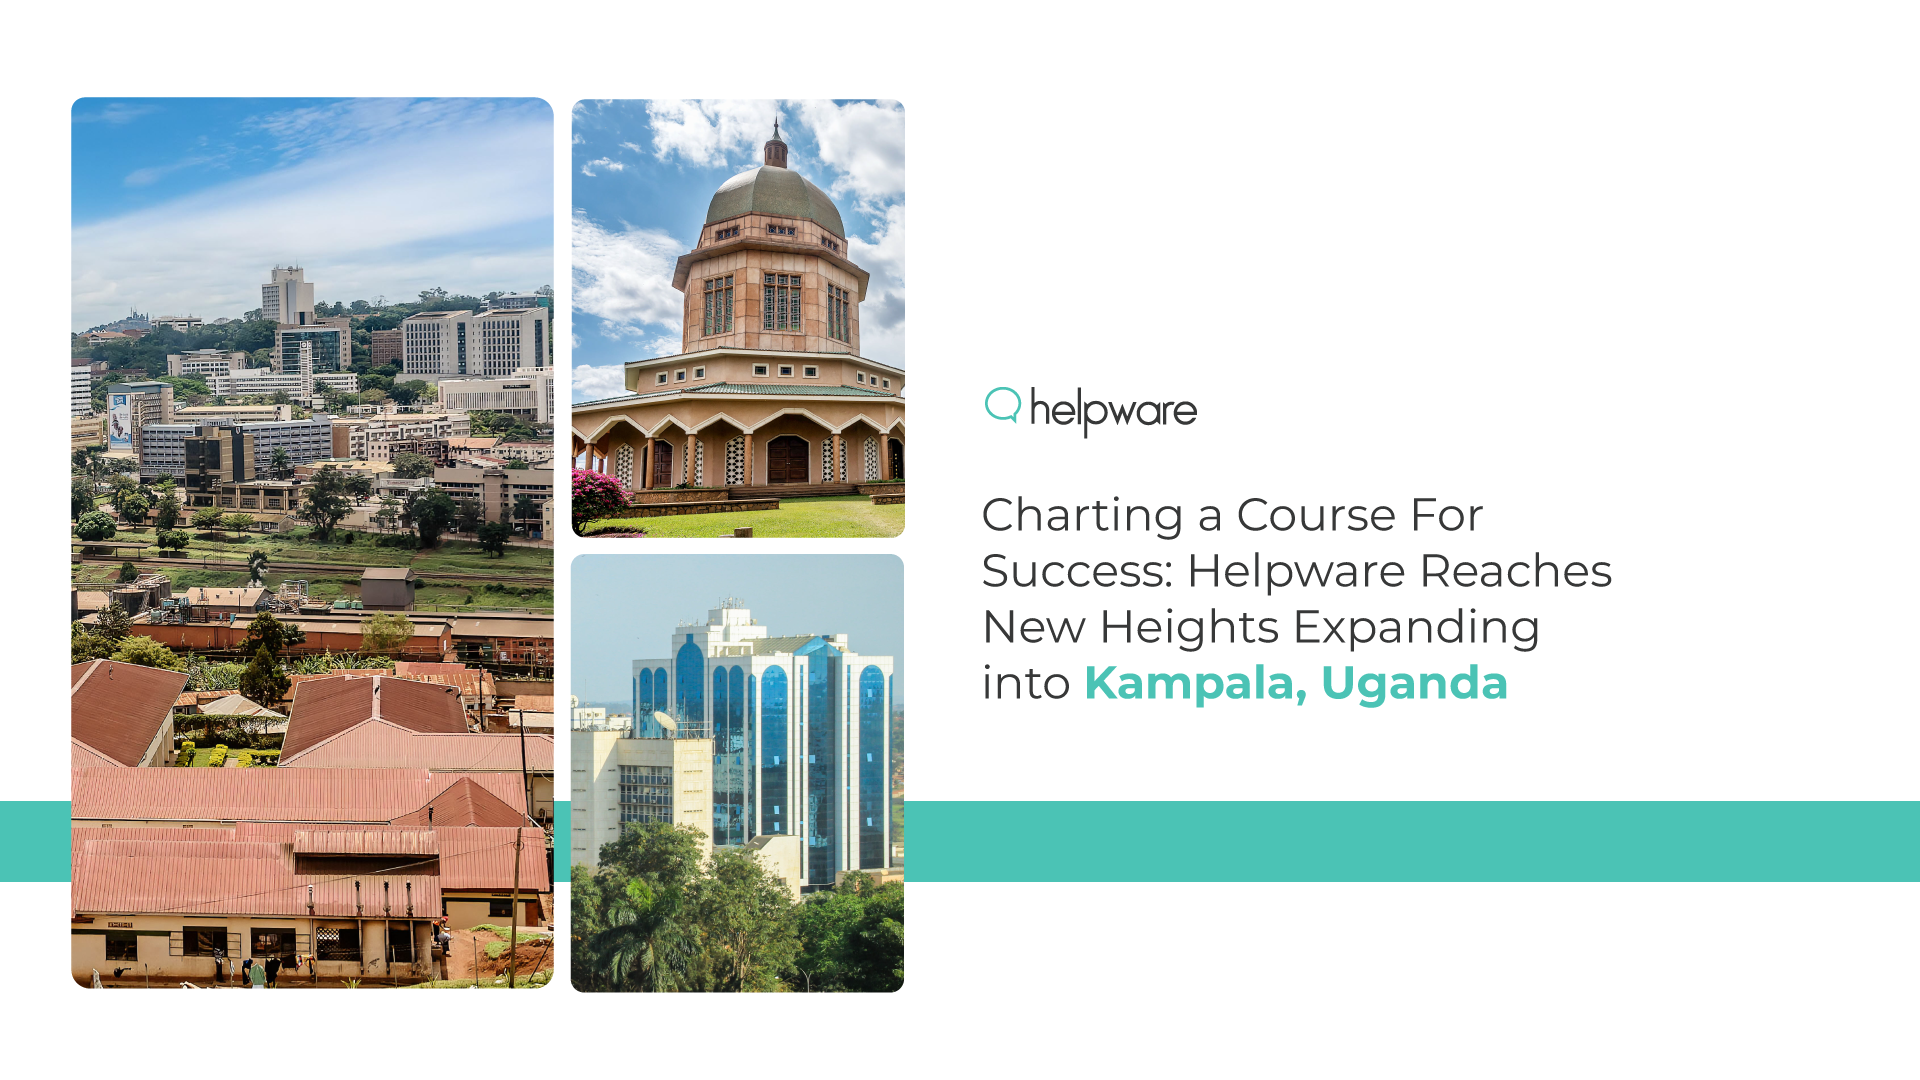 Charting a Course For Success: Helpware Reaches New Heights Expanding into Kampala, Uganda